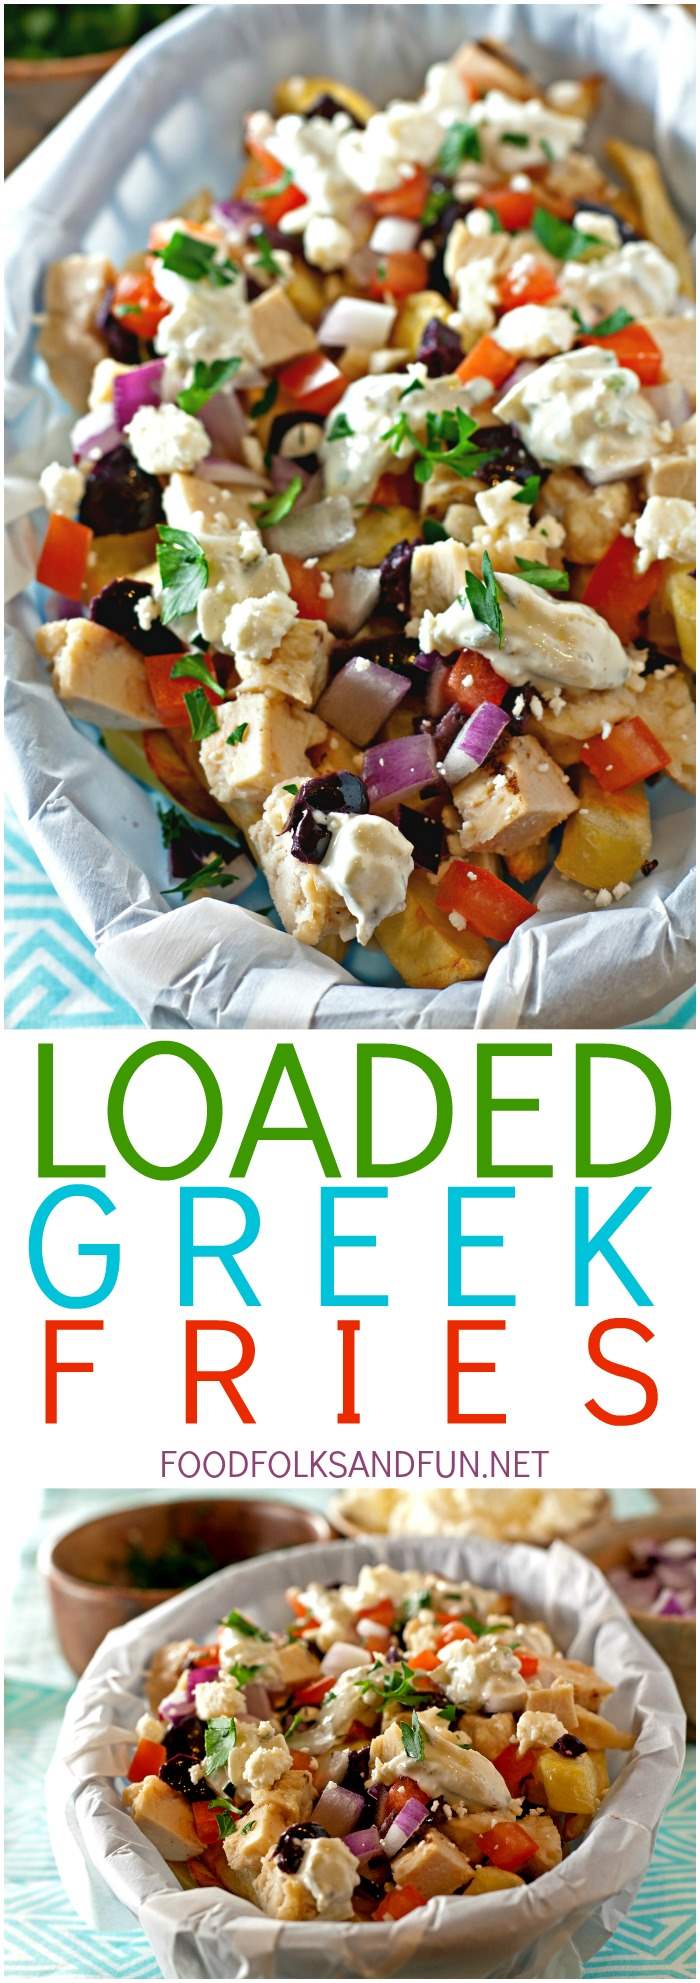 This loaded Greek fries recipe is perfect for weeknight meals or game day eats! These fries are big on flavor!